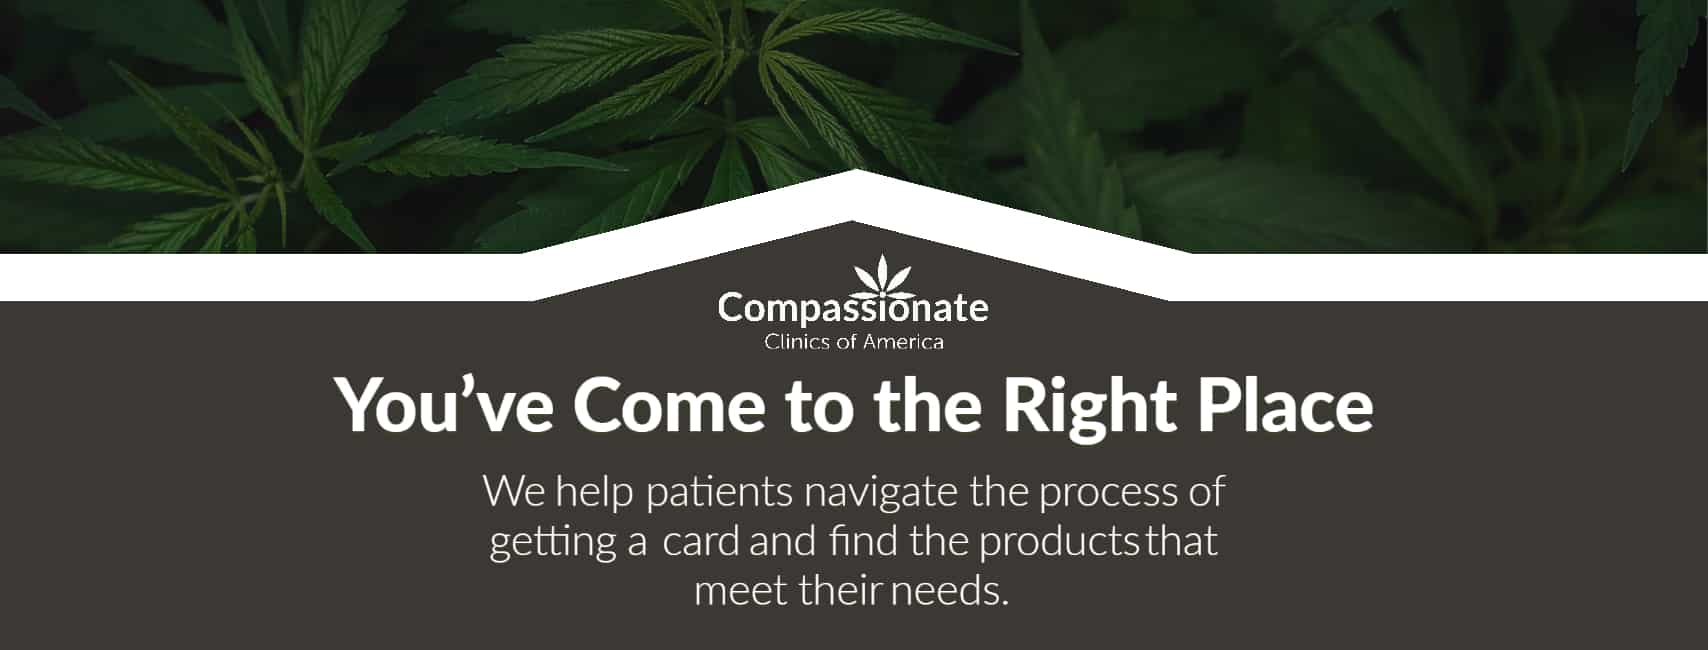 You've come to the right place. We help patients navigate the process of getting a medical cannabis card.